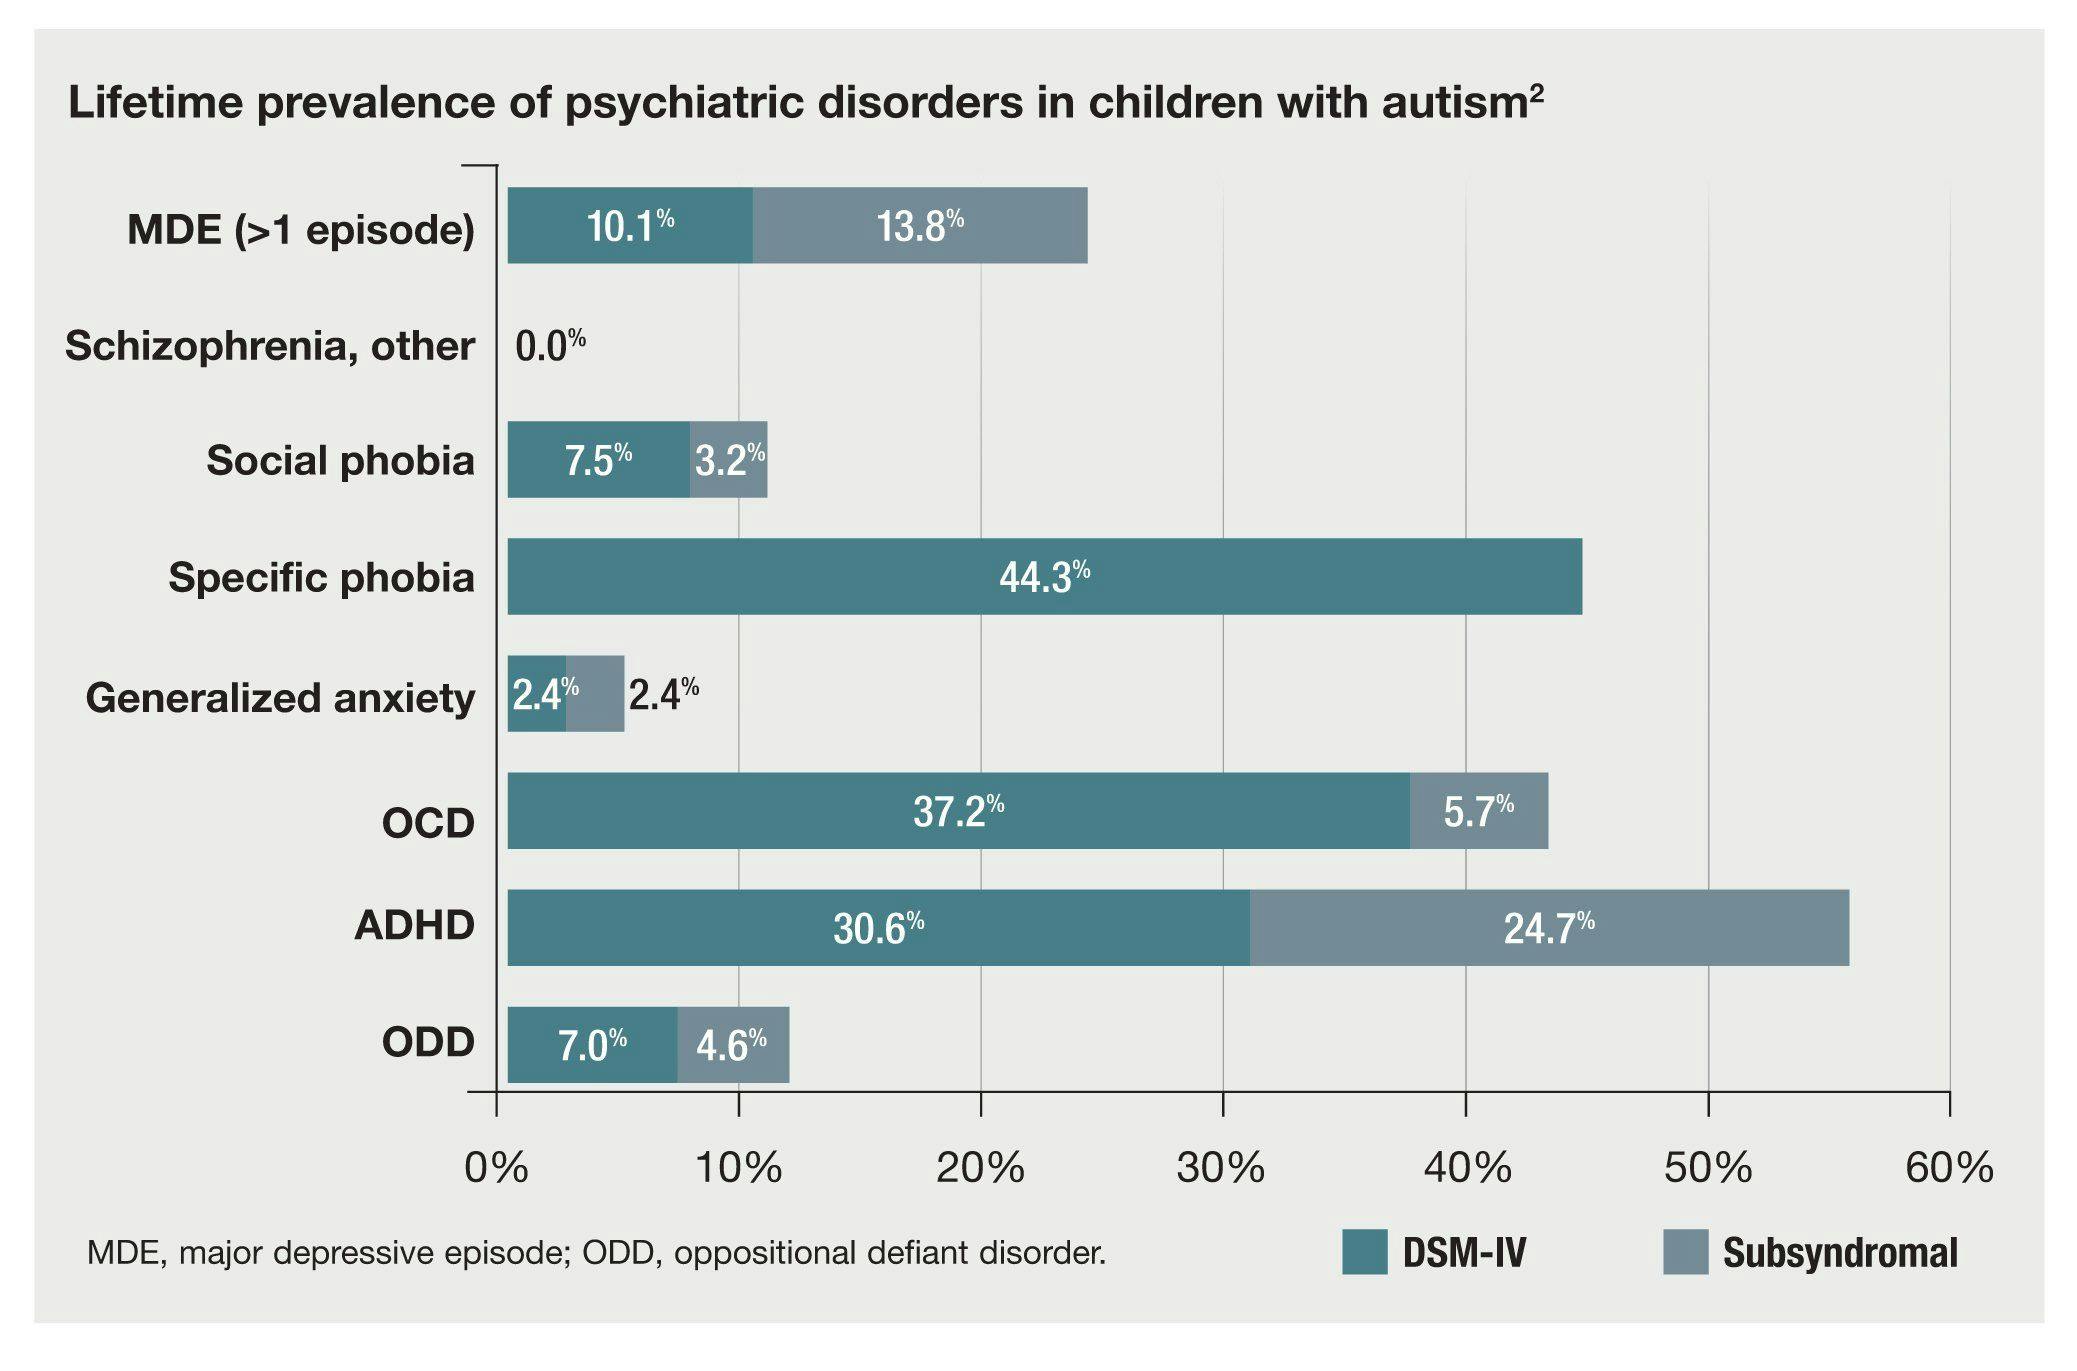 Lifetime prevalence of psychiatric disorders in children with autism